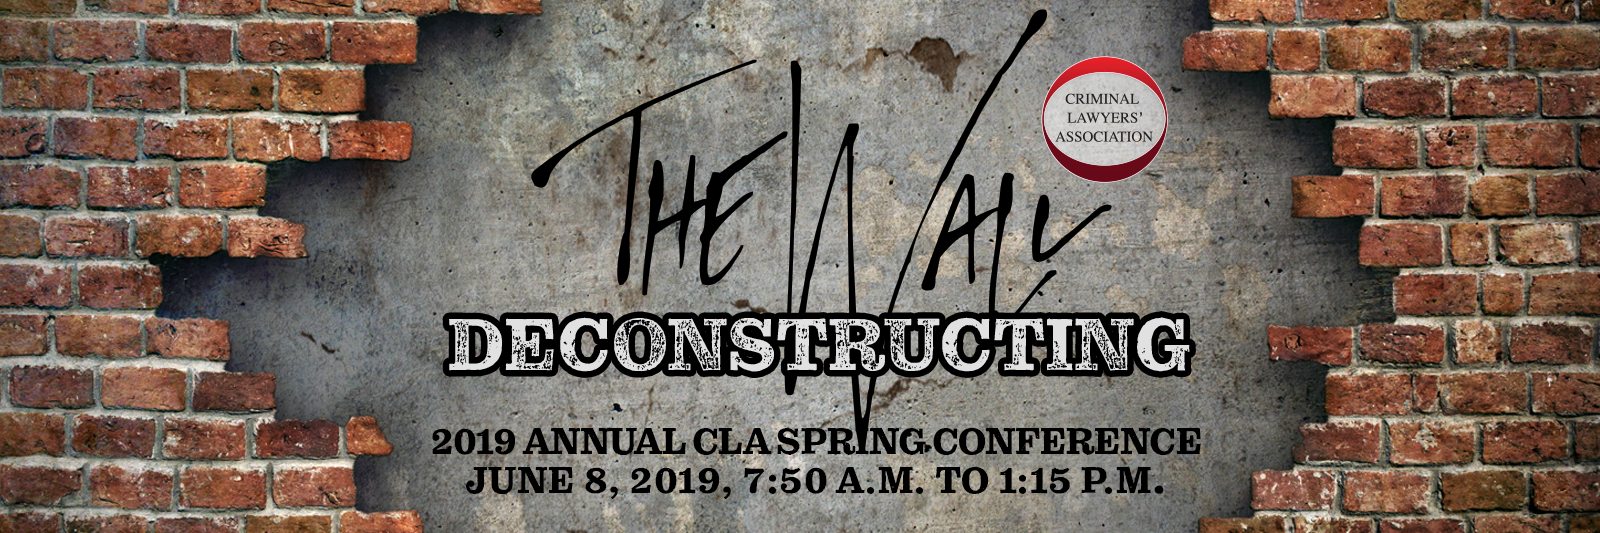 CLA Spring Conferences Archives The Criminal Lawyers' Association (CLA)